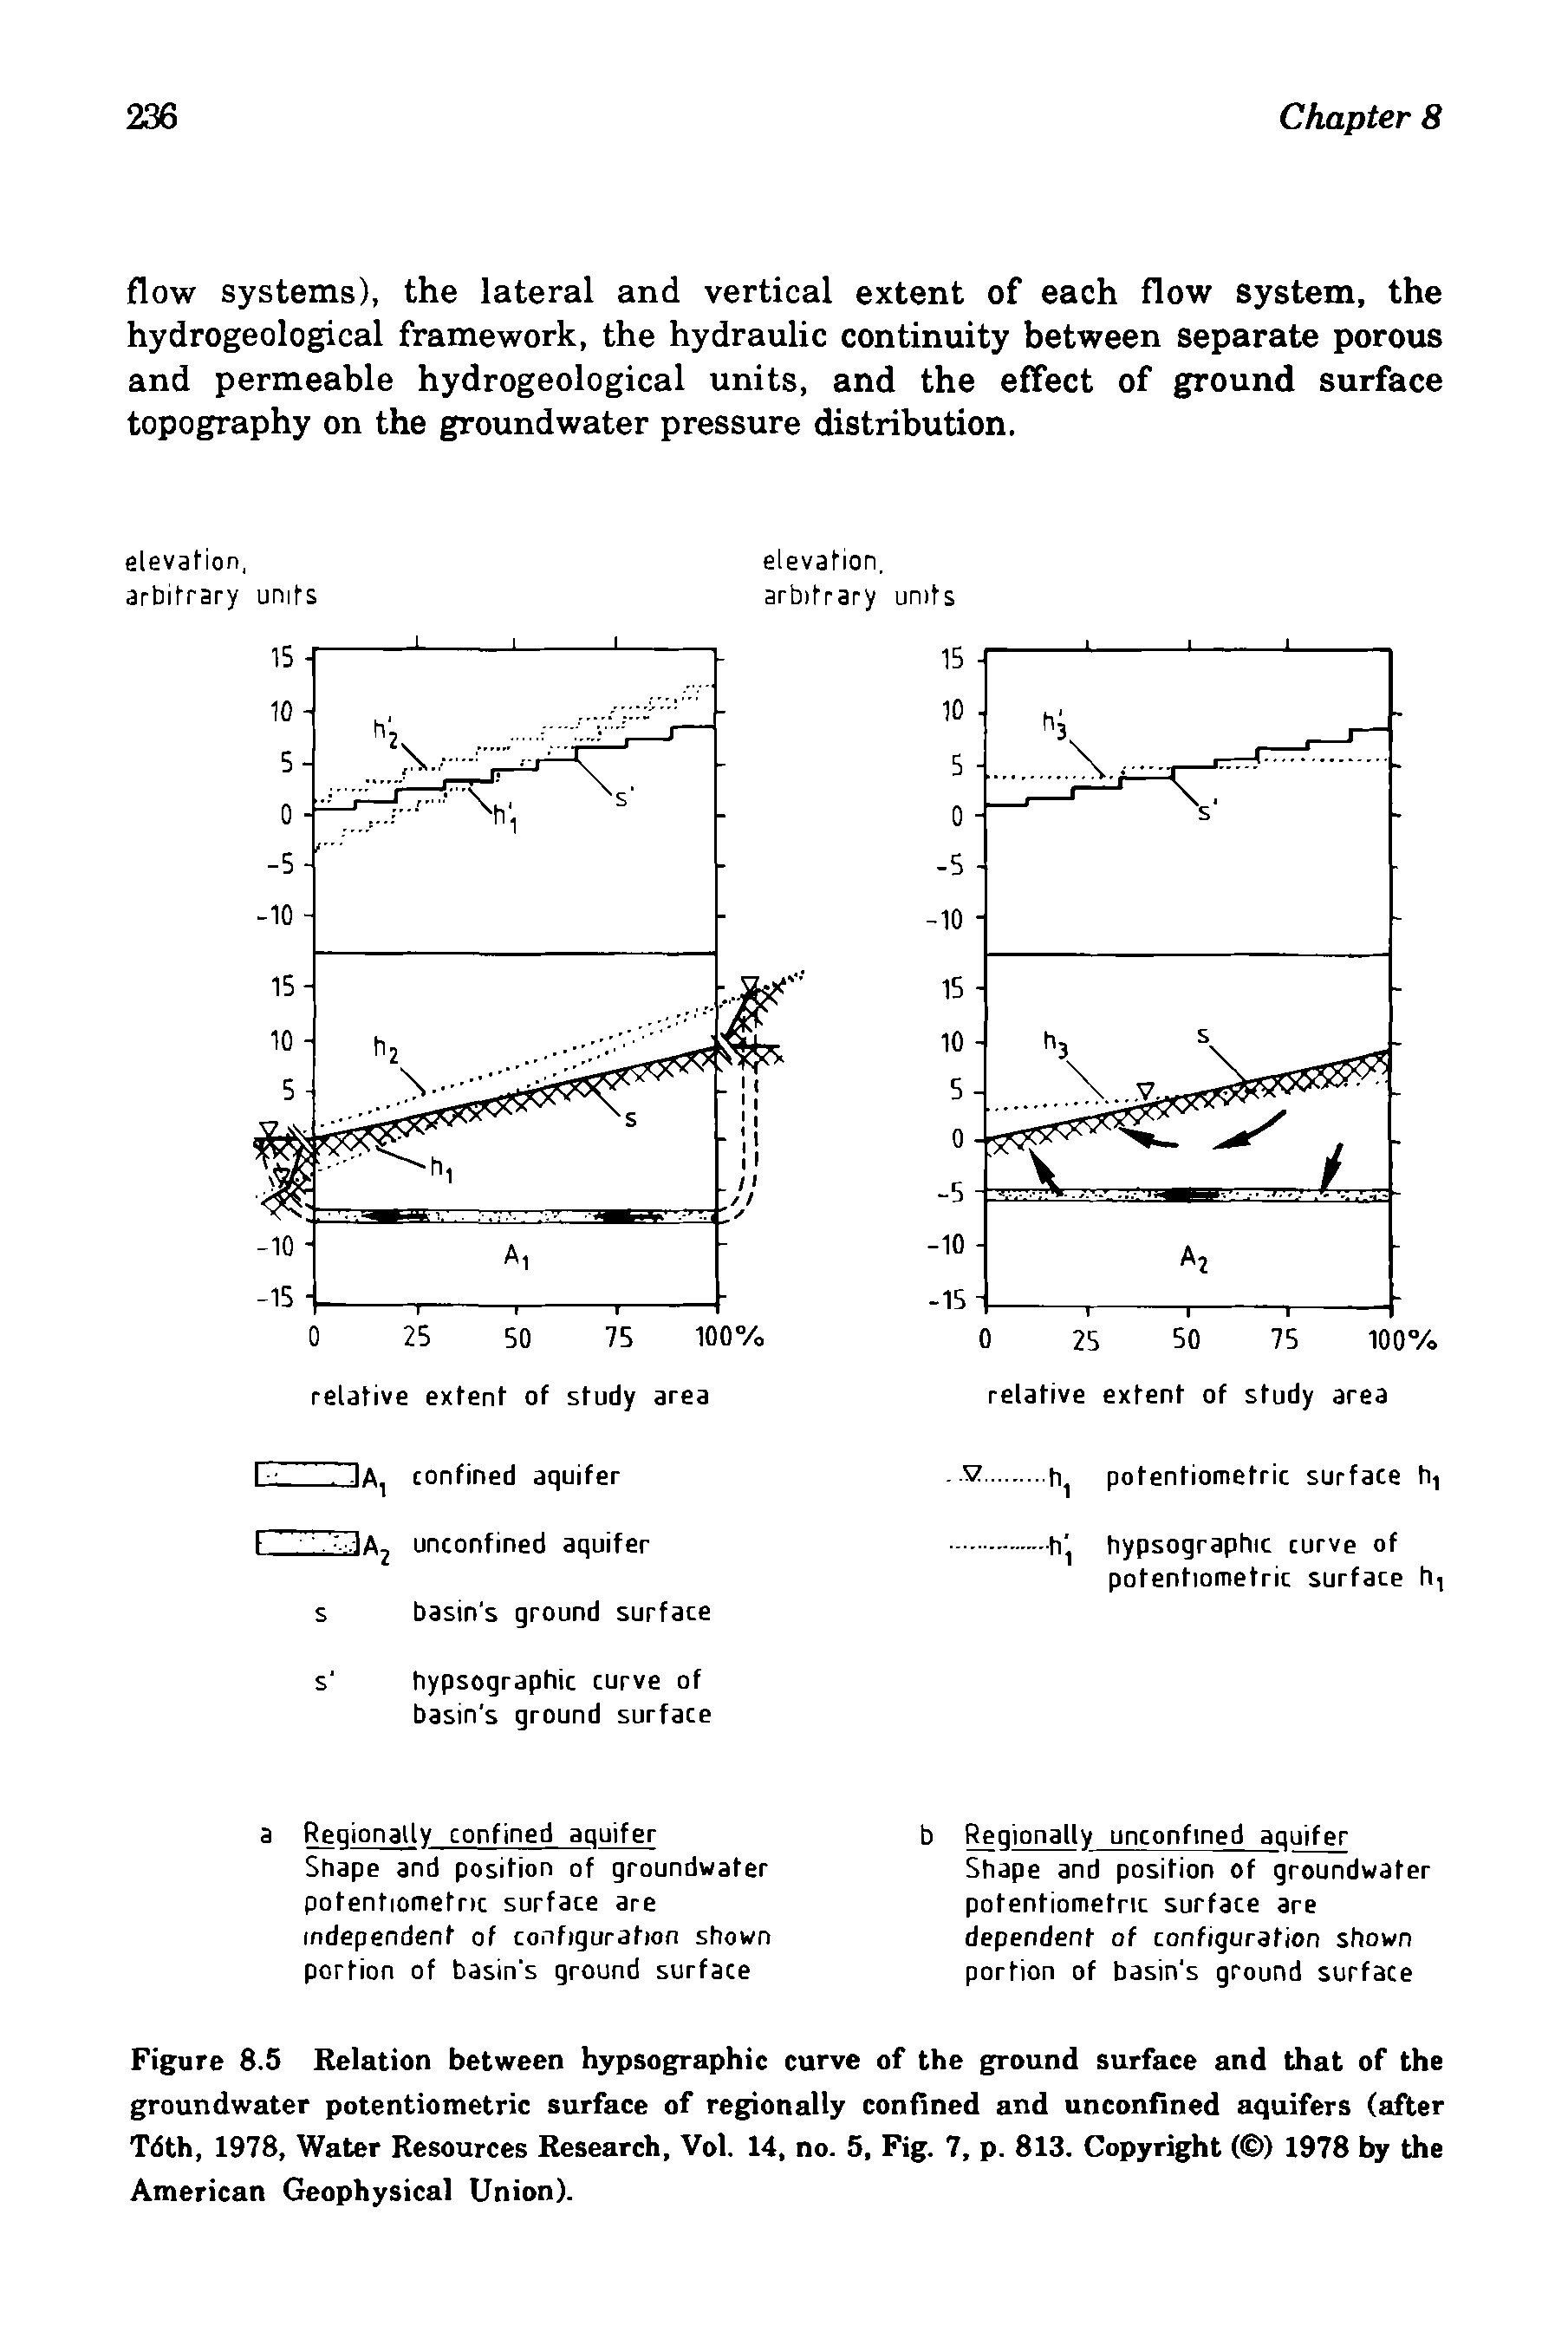 Figure 8.5 Relation between hypsographic curve of the ground surface and that of the groundwater potentiometric surface of regionally confined and unconfined aquifers (after Tdth, 1978, Water Resources Research, Vol. 14, no. 5, Fig. 7, p. 813. Copyright ( ) 1978 by the American Geophysical Union).